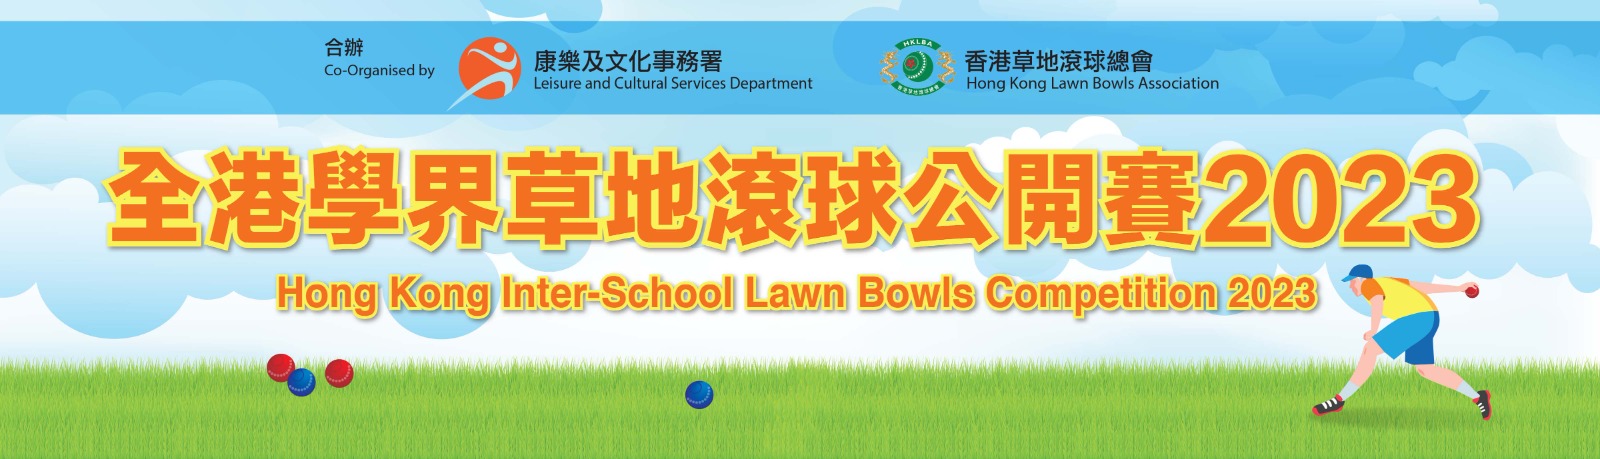 Hong Kong Inter-school Lawn Bowls Competition 2023 (Updated on 21/4/23)